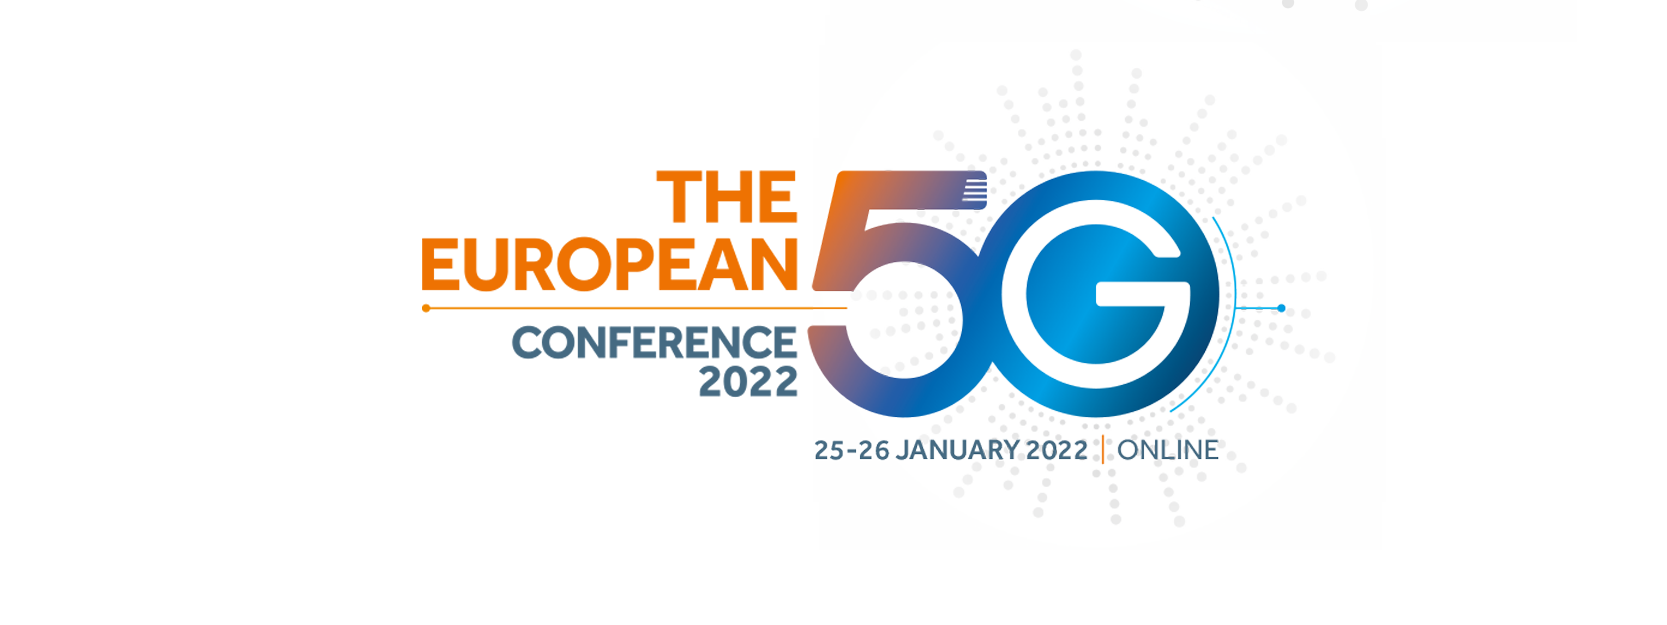 The European 5G Conference 2022